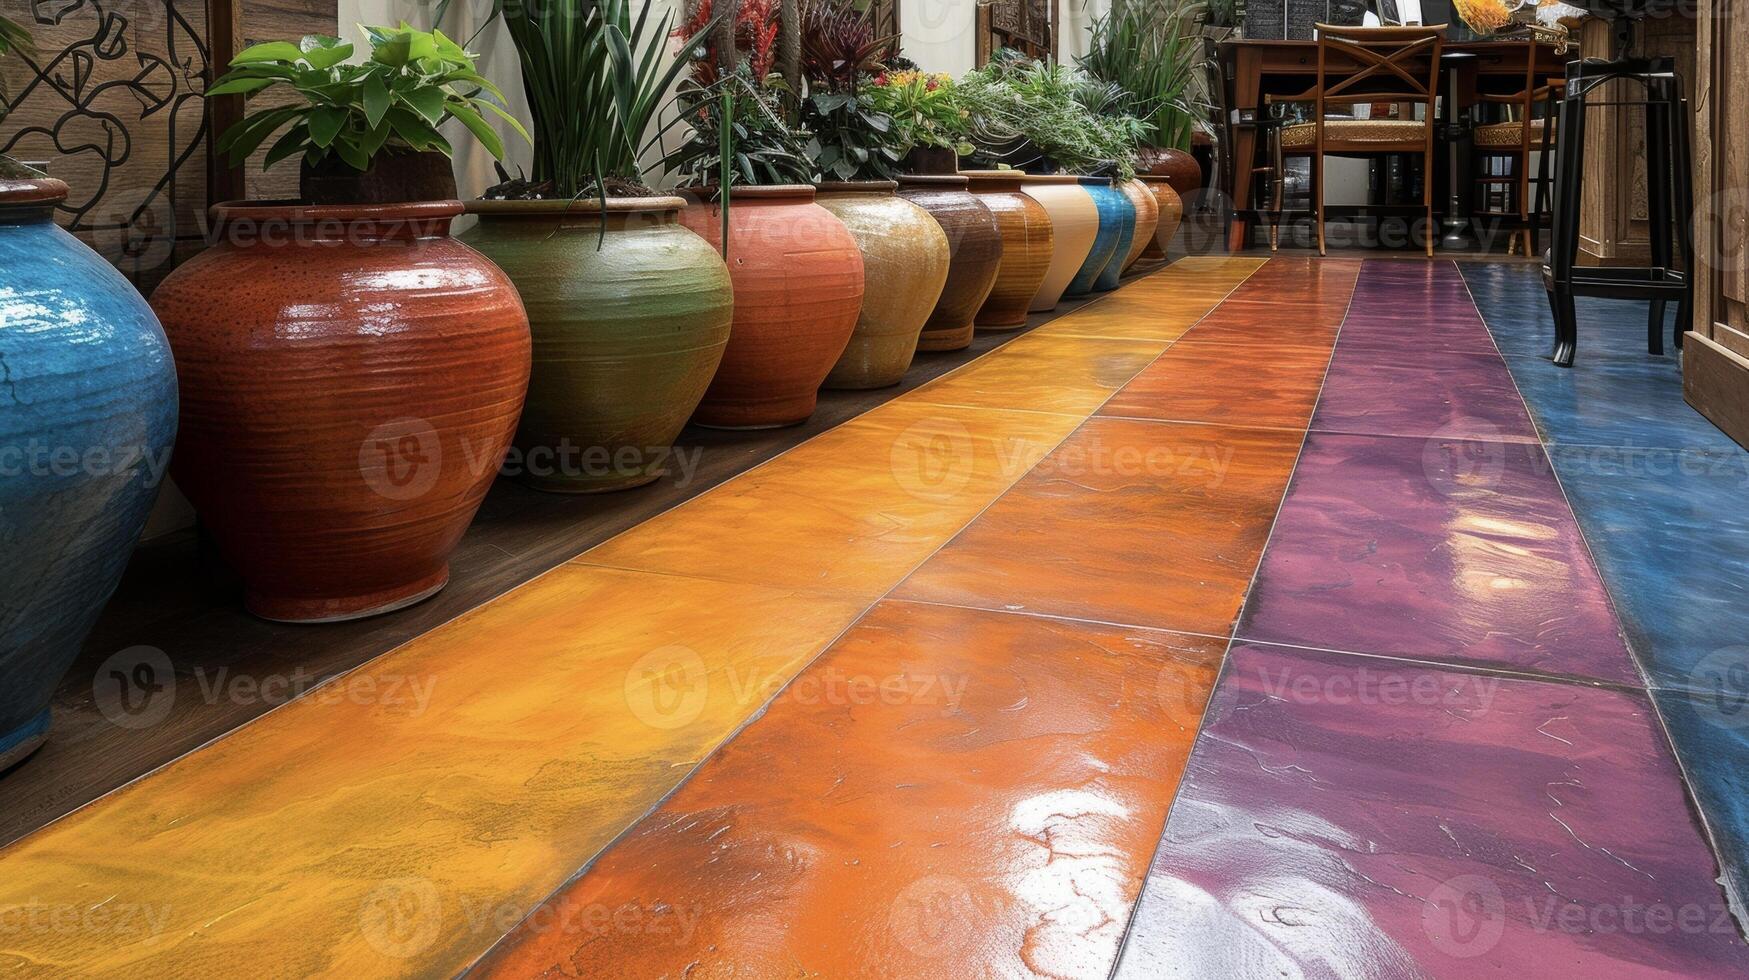 Say goodbye to boring and hello to bold with the striking colors and patterns achieved by acidstaining concrete floors photo